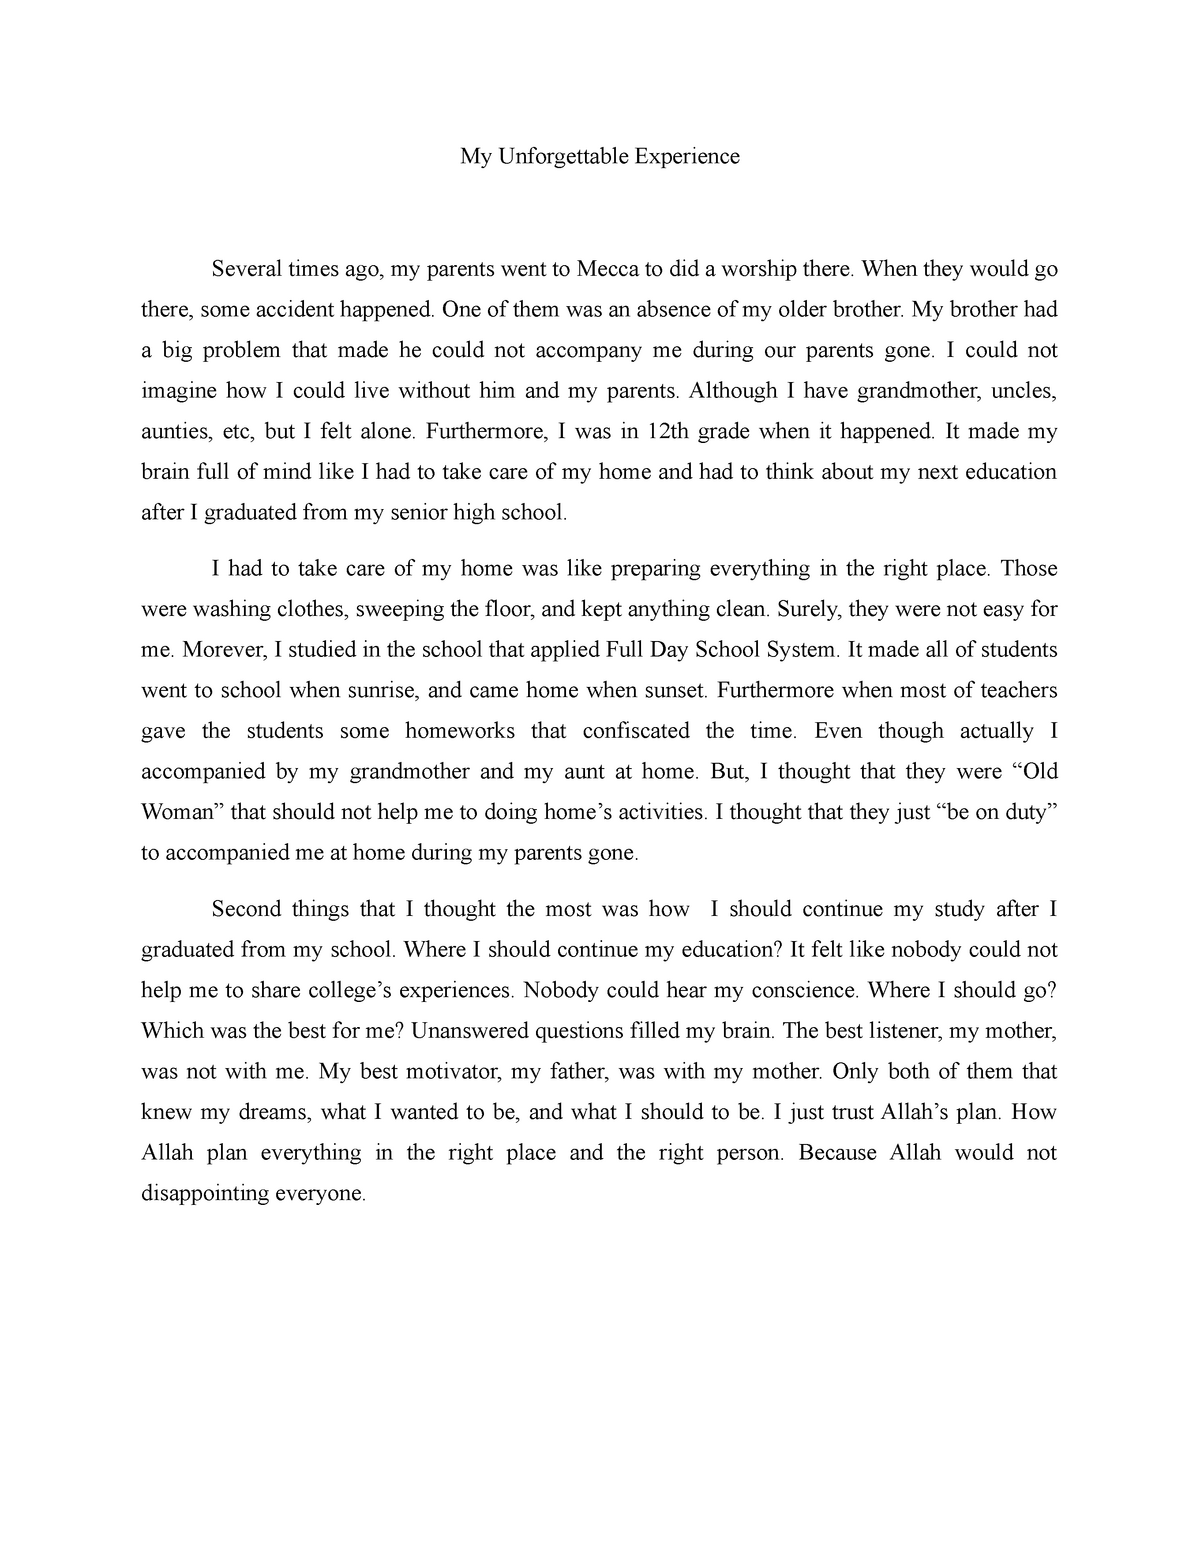 sample essay about unforgettable experience